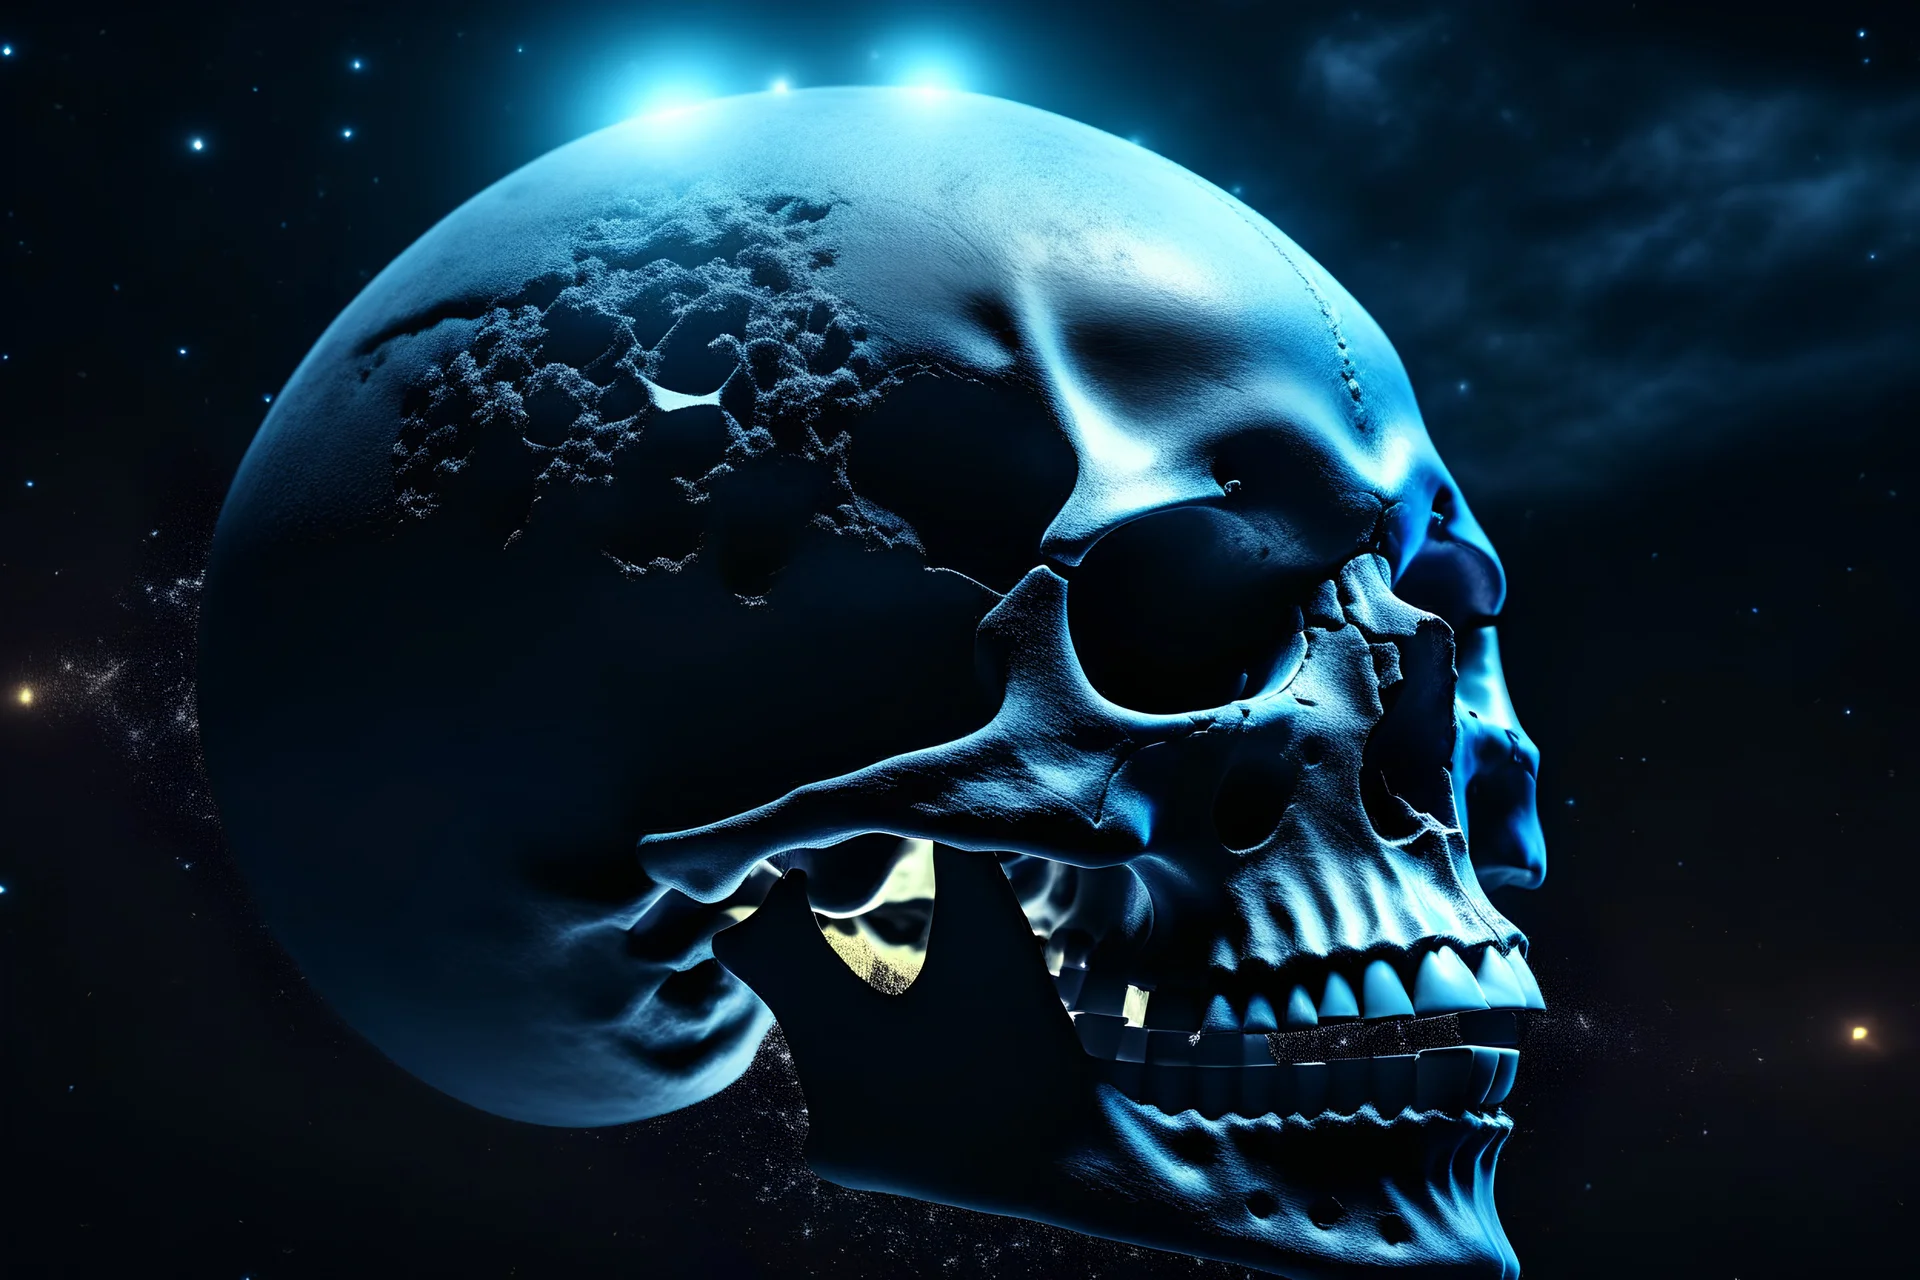 still photo series premiere top rated runaway hit new wifi scifi dystopian nightmare fantasy documentary style tv series.death kiss. communal cranium. glowing moon as skull suspended up high above in the glittering Milky Way night sky. photo real